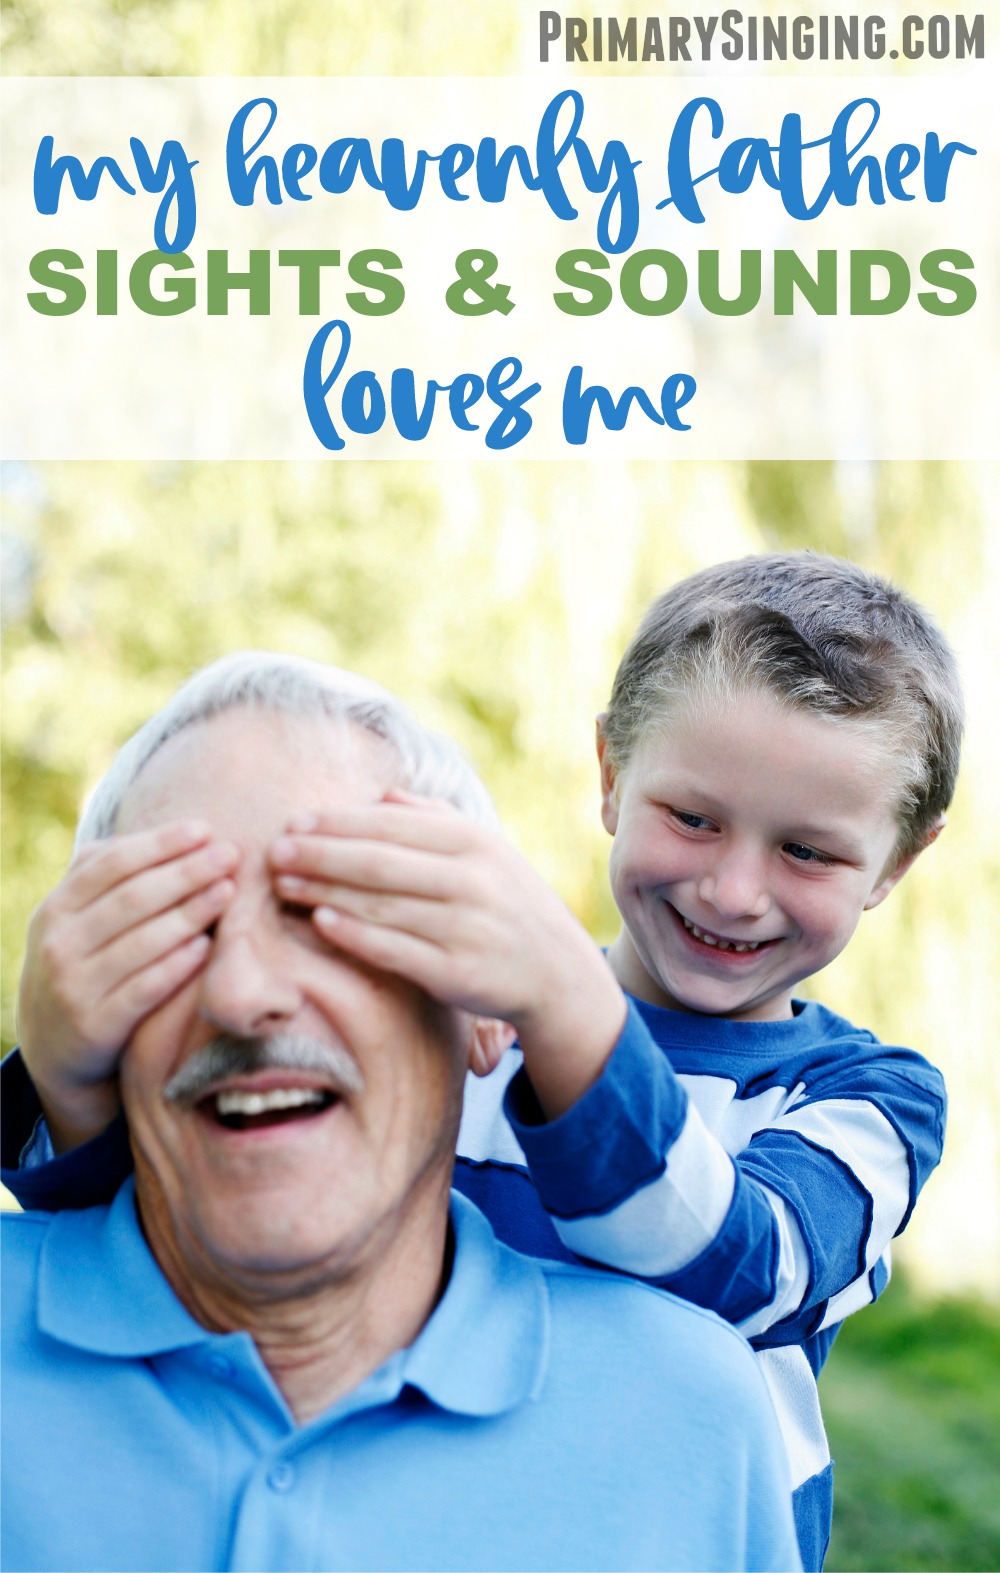 My Heavenly Father Loves Me Sights & Sounds Video Lesson plan for Primary singing time LDS music leaders / choristers!